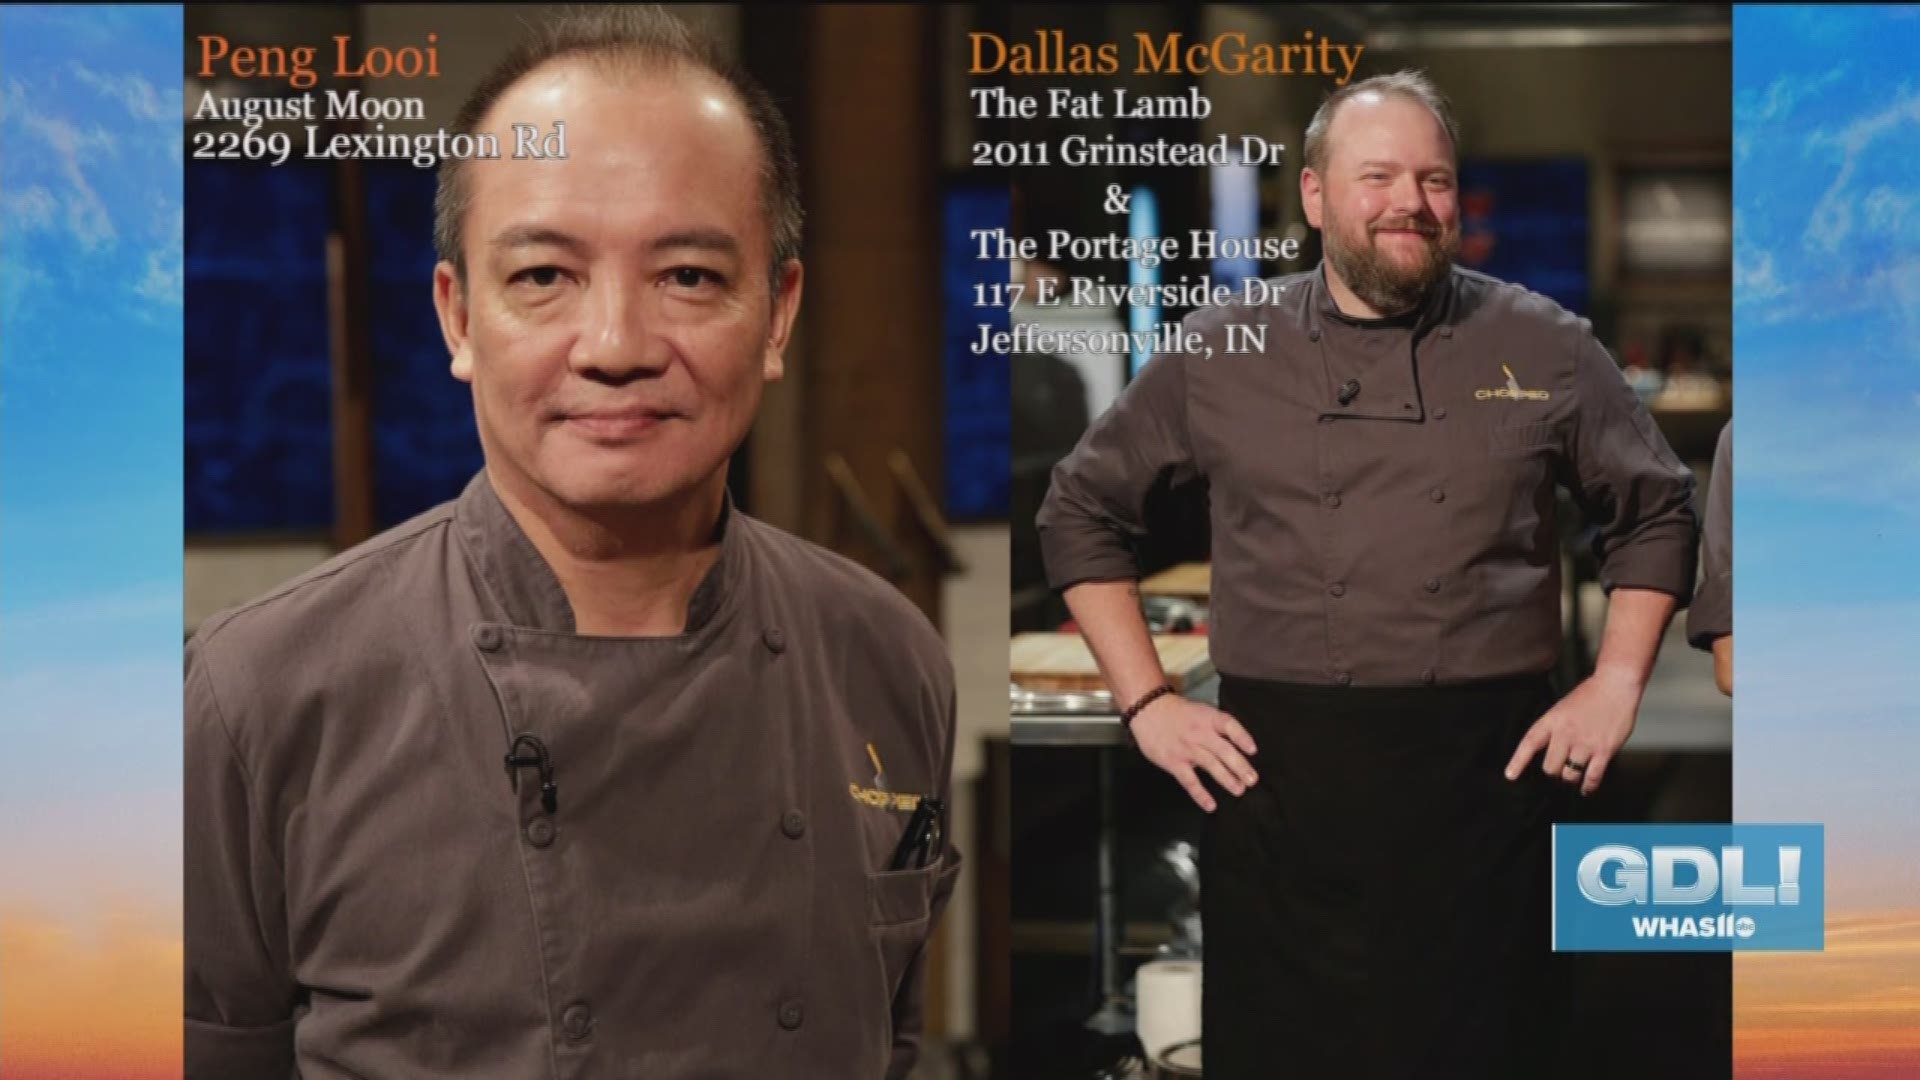 Two Louisville chefs are bringing national attention to Louisville on the Food Network show, Chopped. Chef Dallas McGarity and Chef Peng Looi stopped by Great Day Live to talk about their experiences.